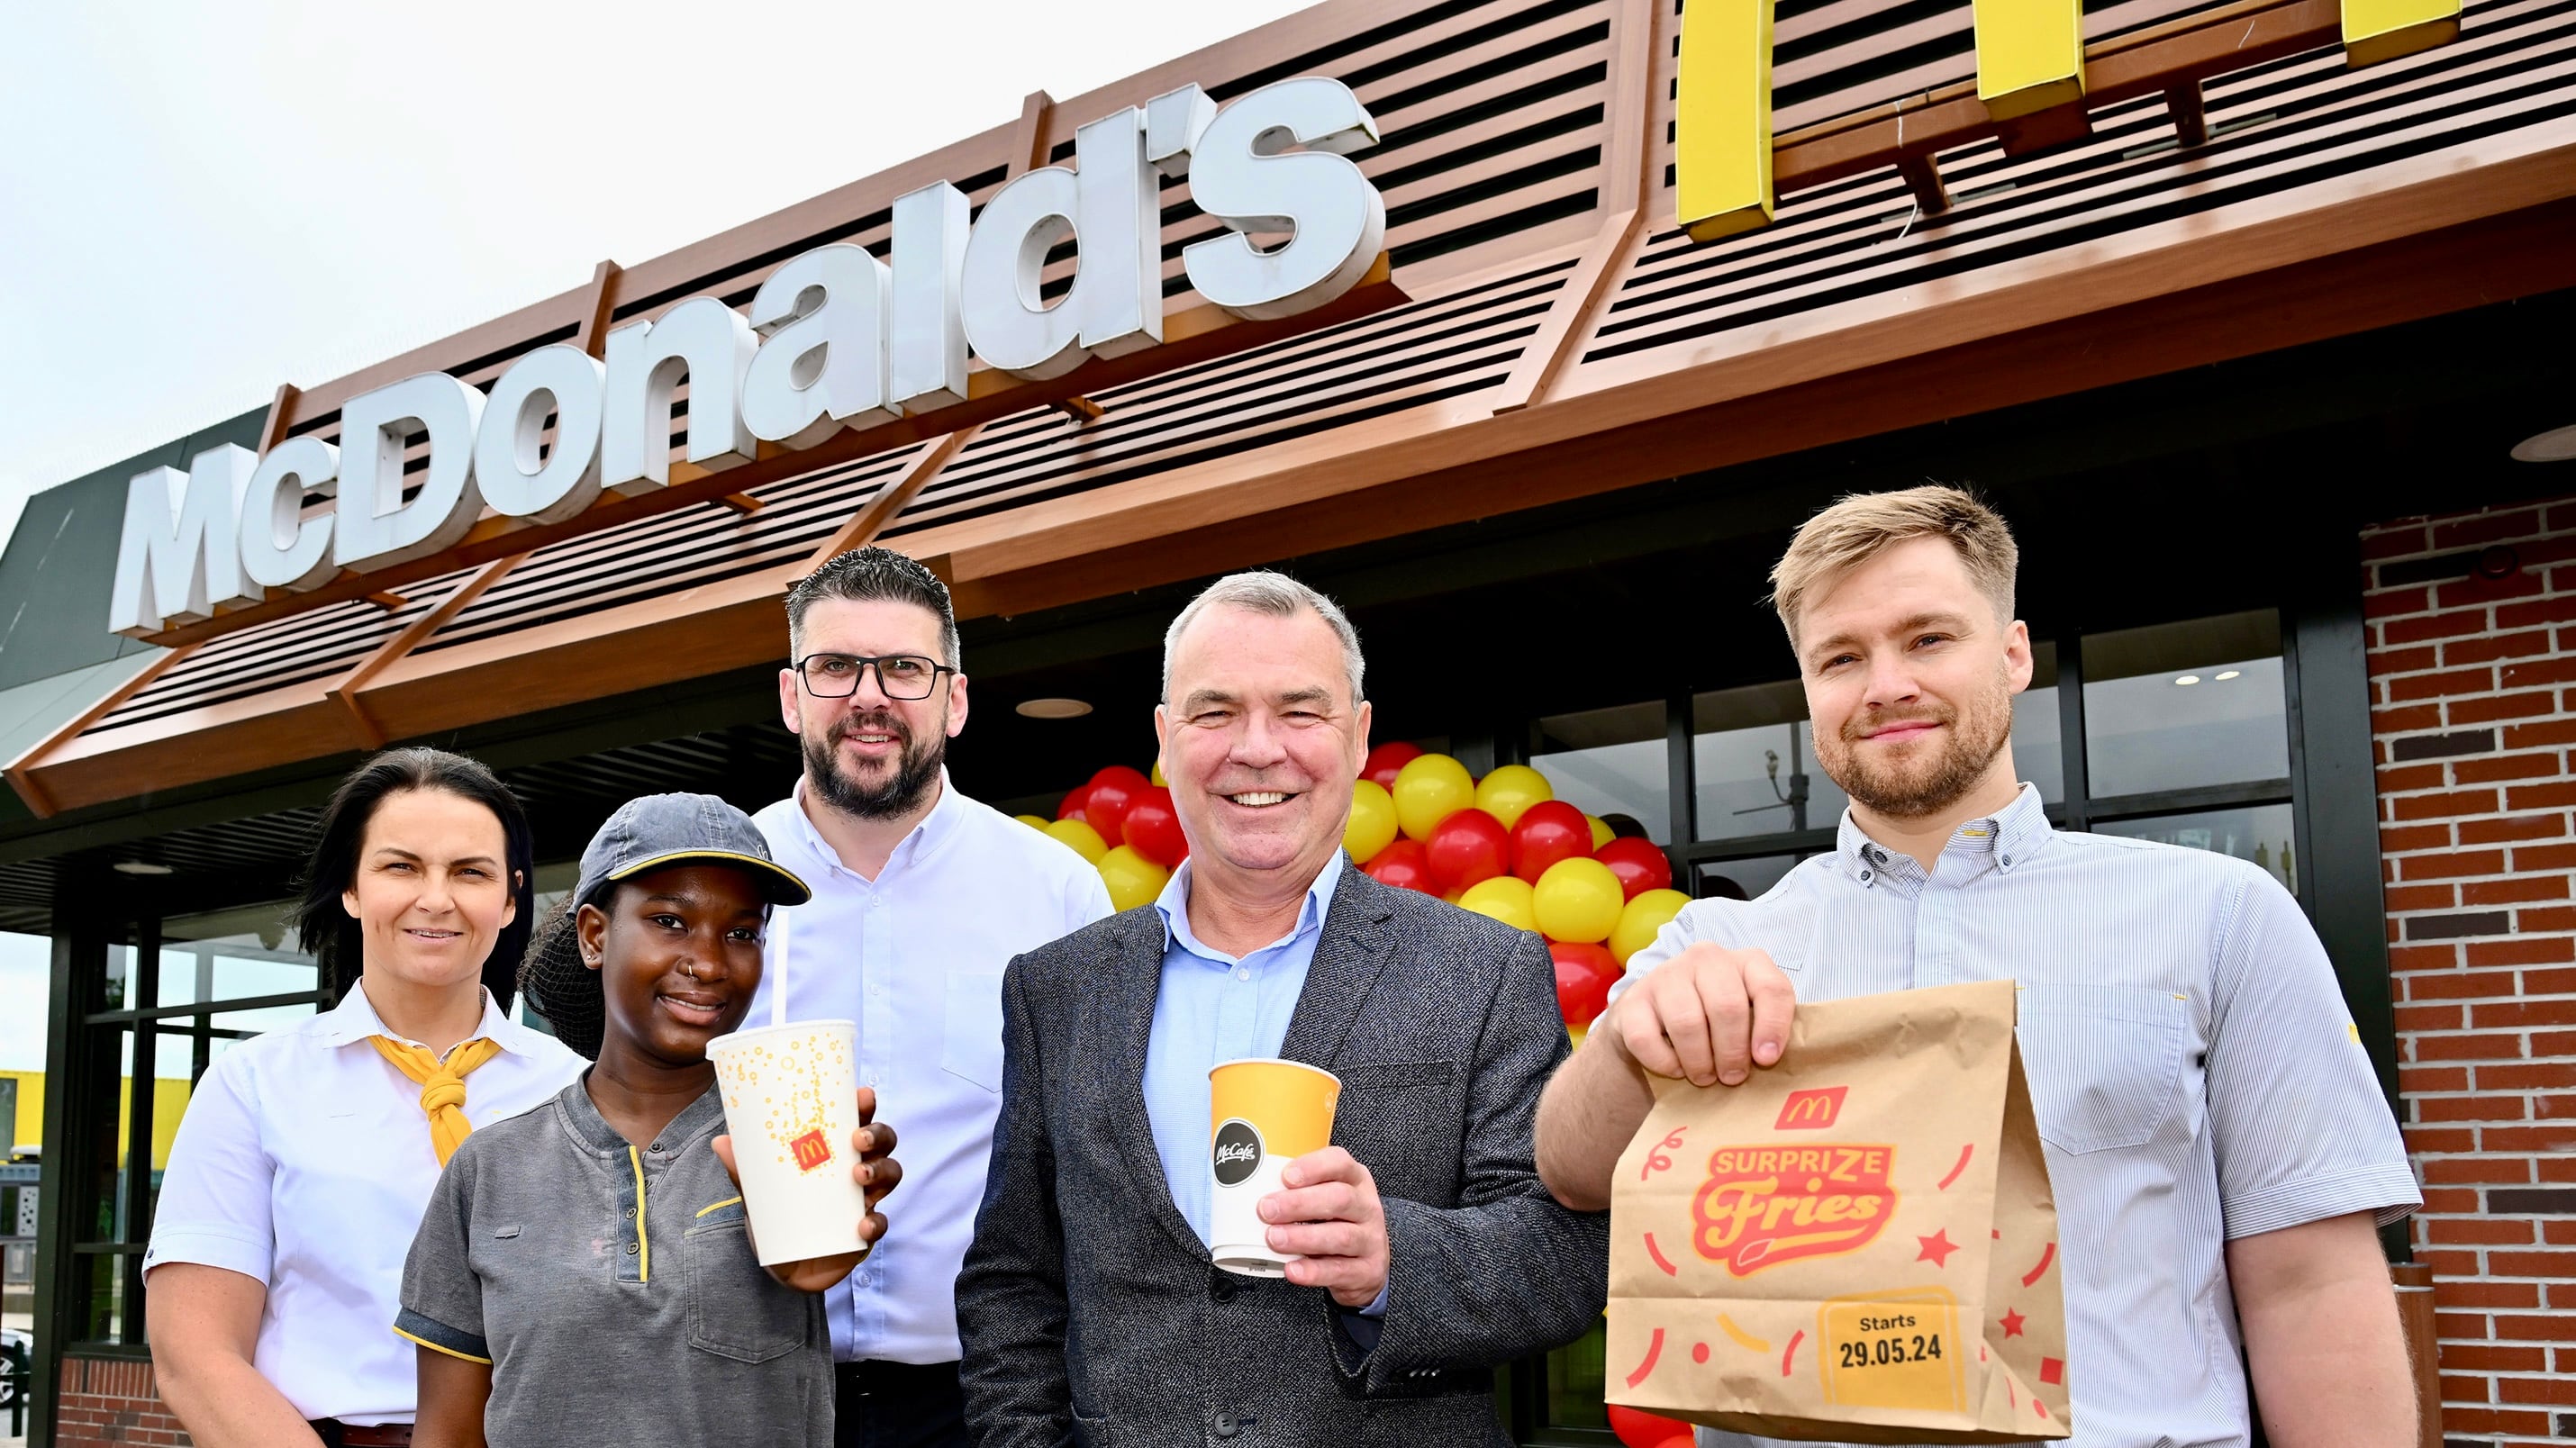 The McDonald’s restaurant at Connswater in east Belfast has reopened following a £1 million refurbishment project. 
And the investment will bring more than 20 additional jobs over the coming months, taking the total number of employees at the restaurant to 180